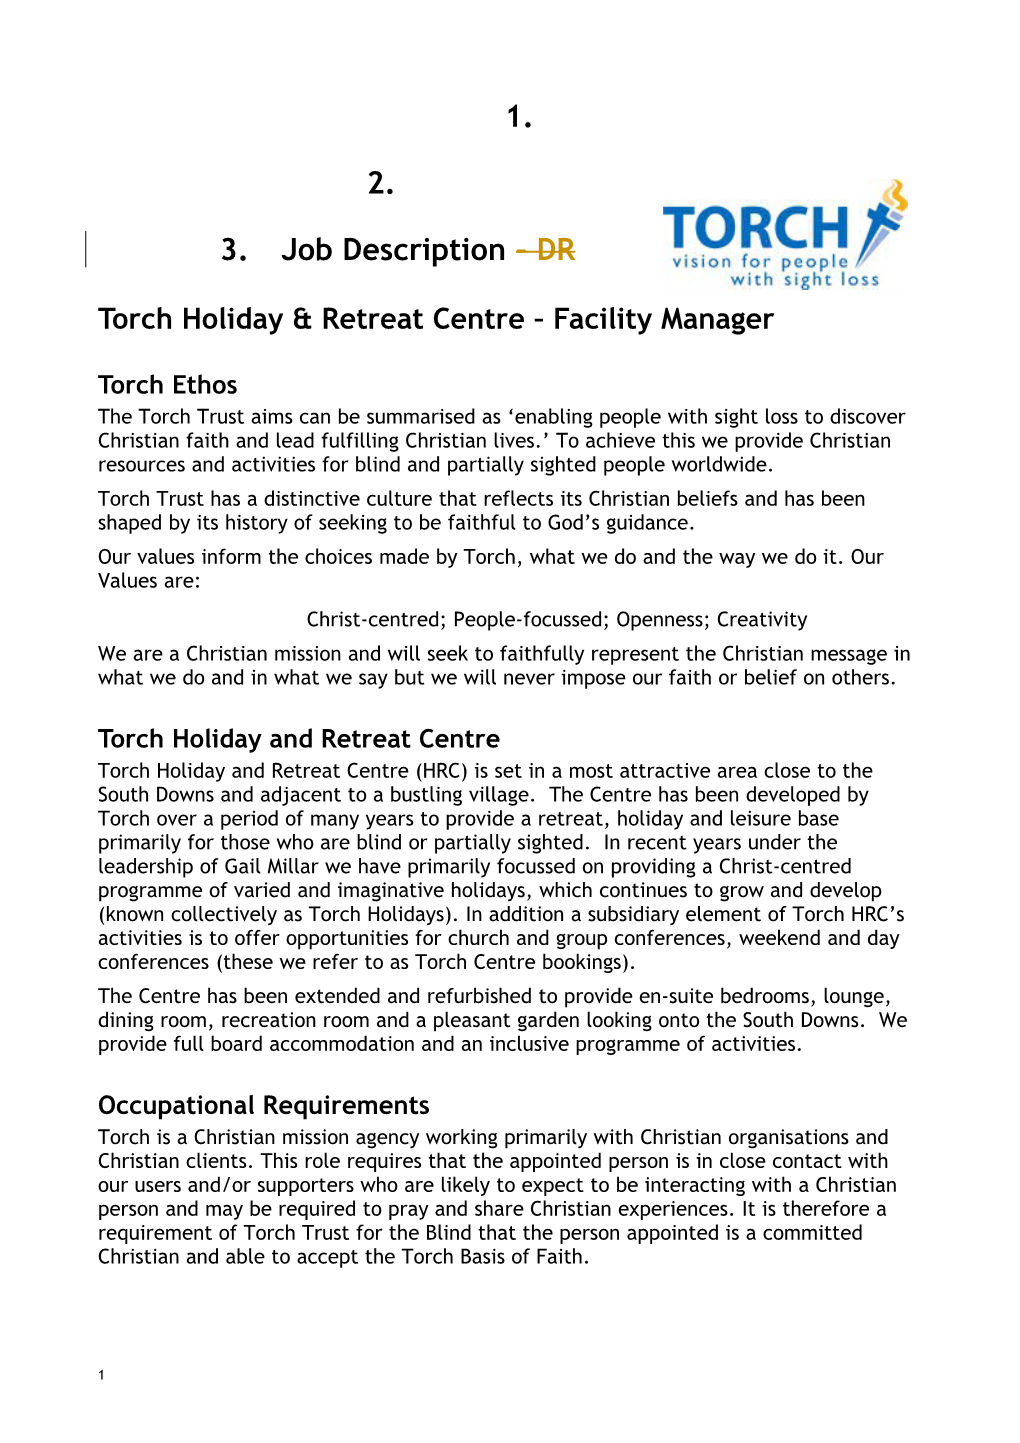 Torch Holiday & Retreat Centre Facility Manager